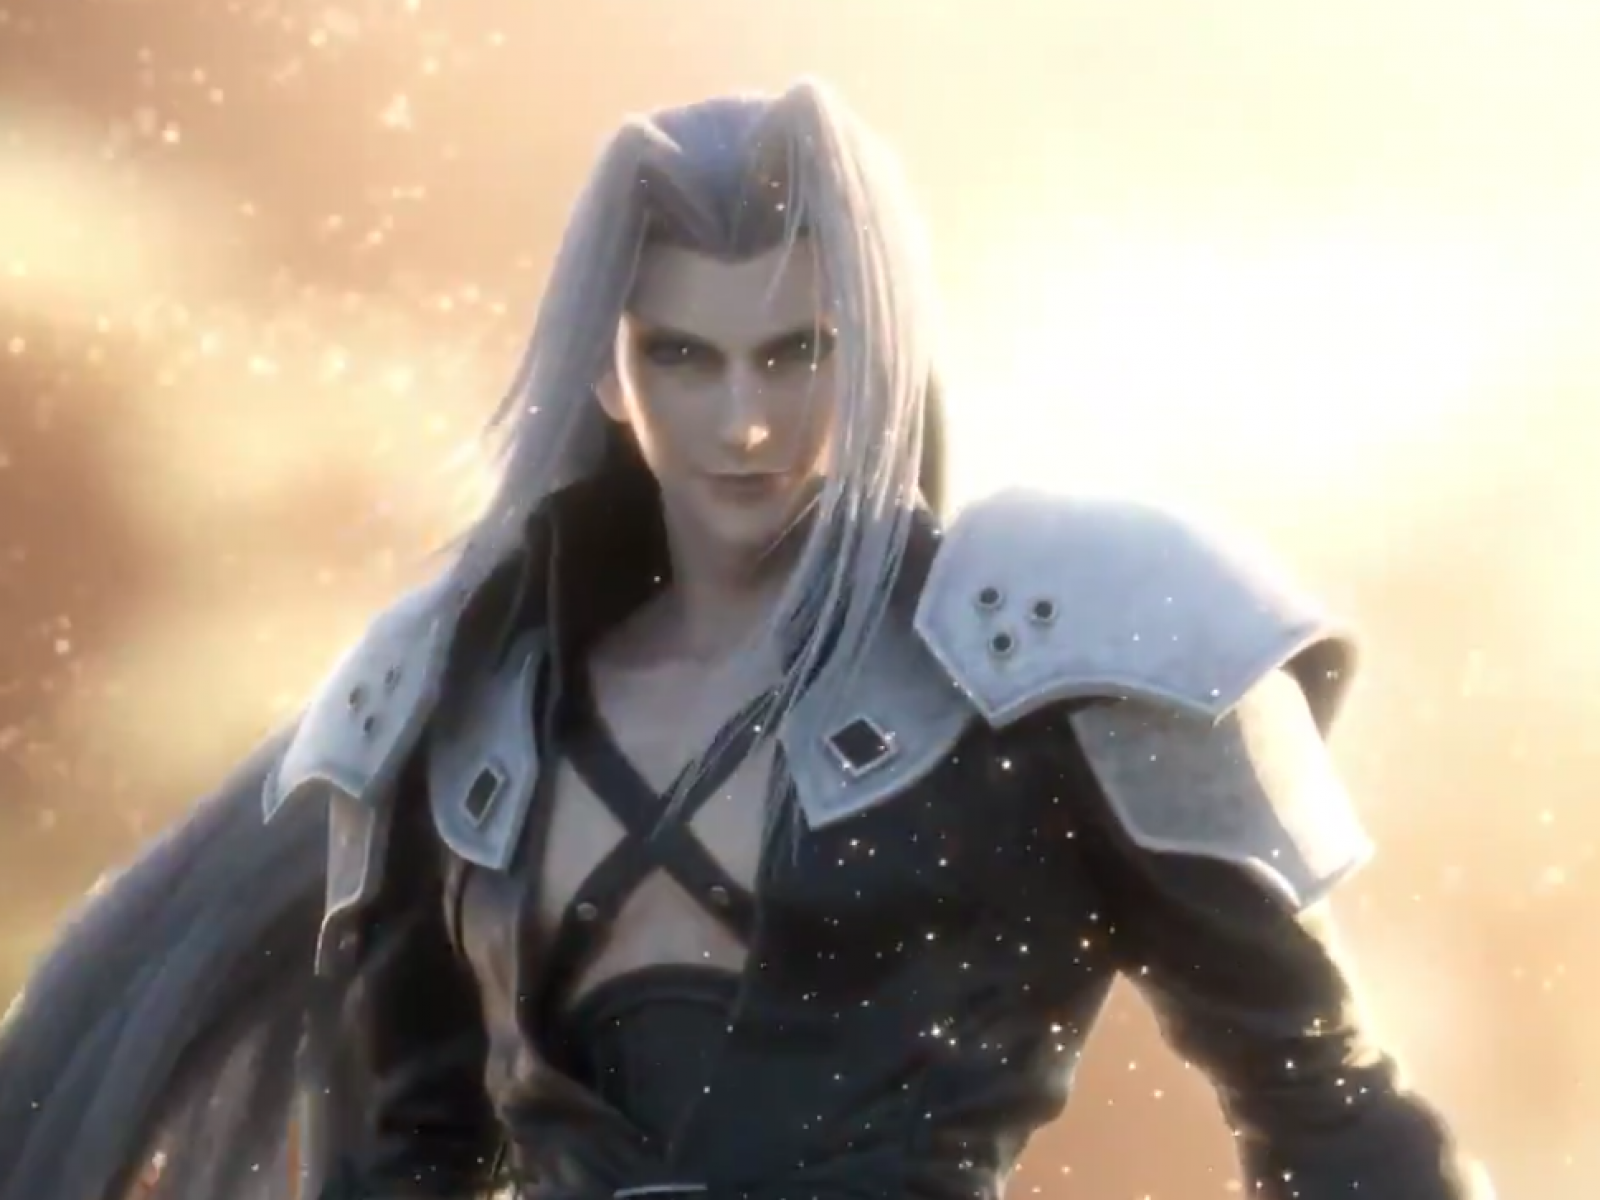 Sephiroth from 'Final Fantasy VII' to Join 'Smash Ultimate' in